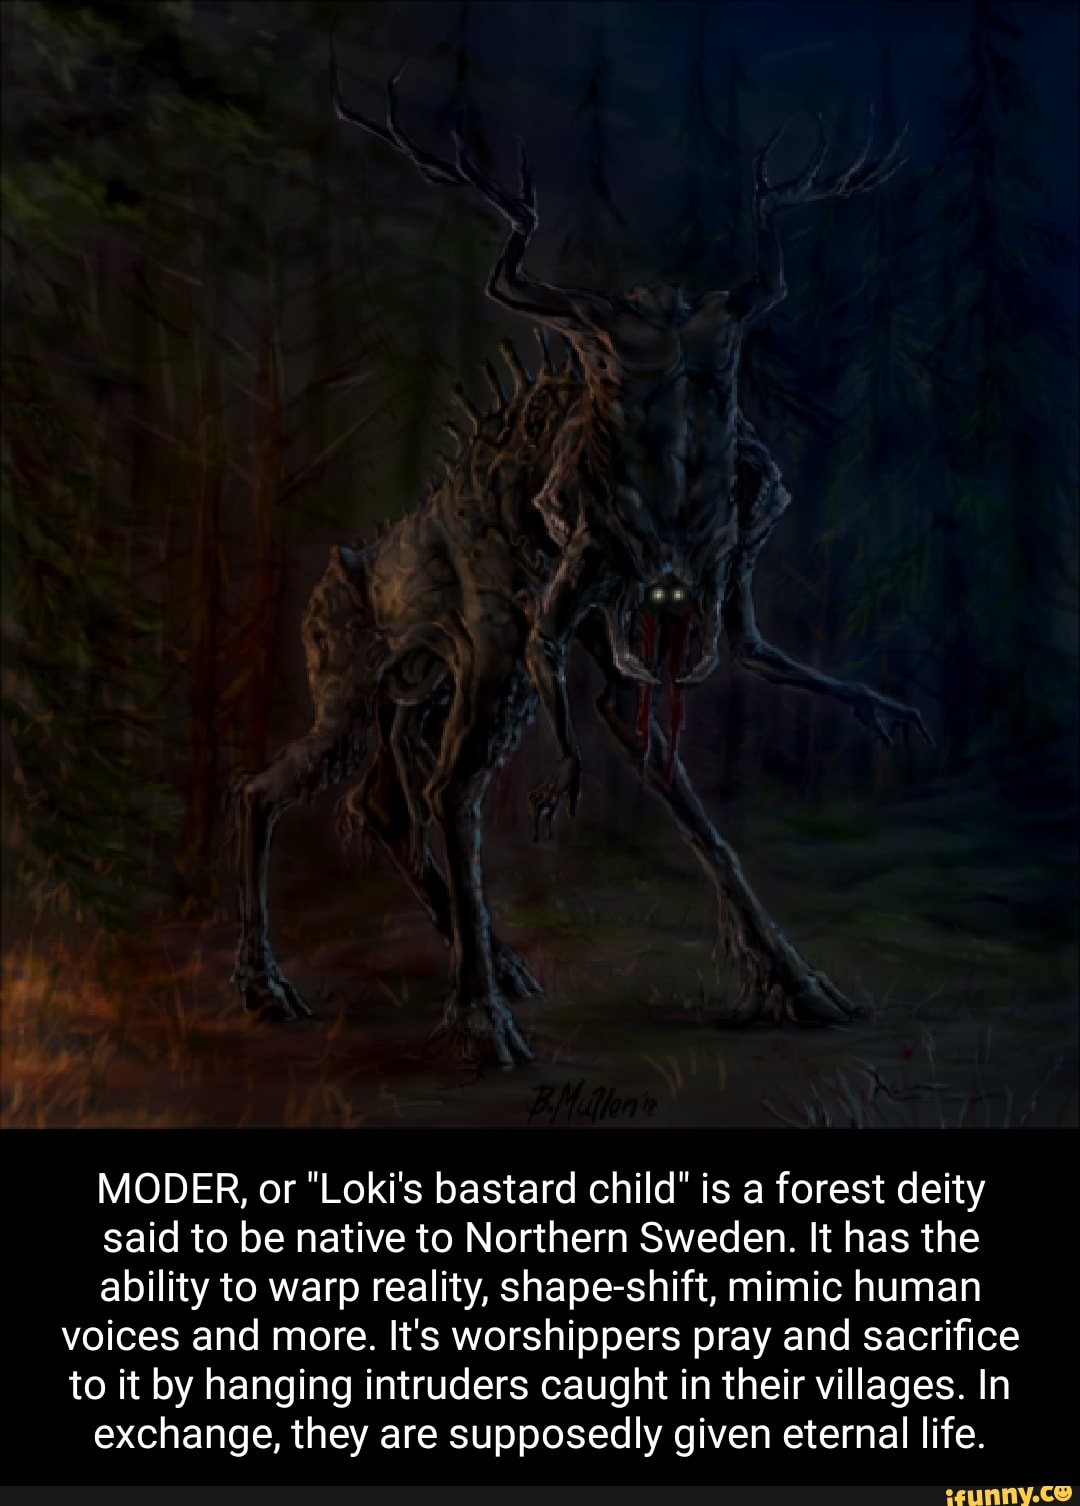 MODER, or Loki's bastard child is a forest deity said to be